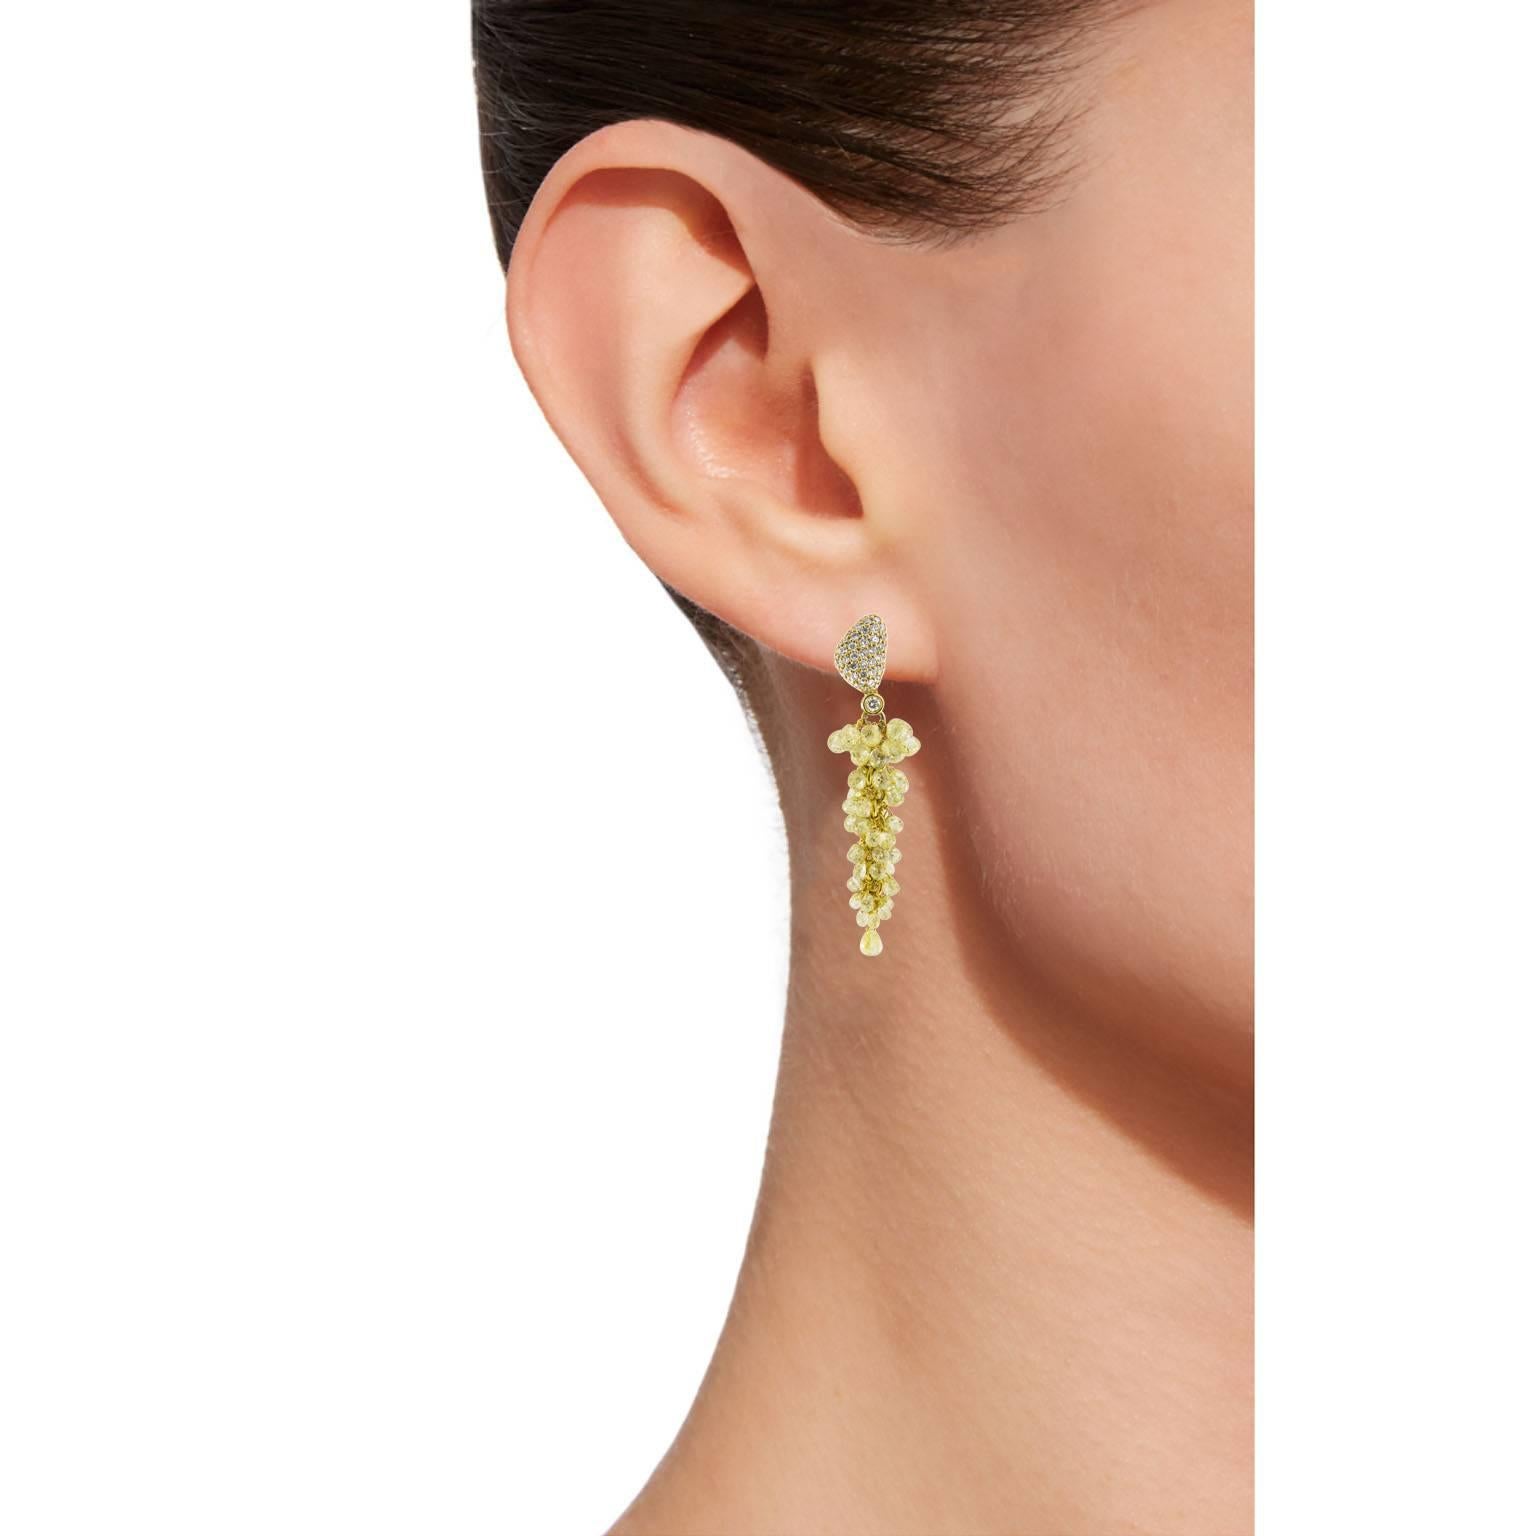 Jona design collection, hand crafted in Italy, beautiful and stunning Cluster of natural fancy color diamond briolette cut drops, weighing 2,43 carats set in 18k yellow gold, dangling from a free form central motif set with 0.88 carats of white